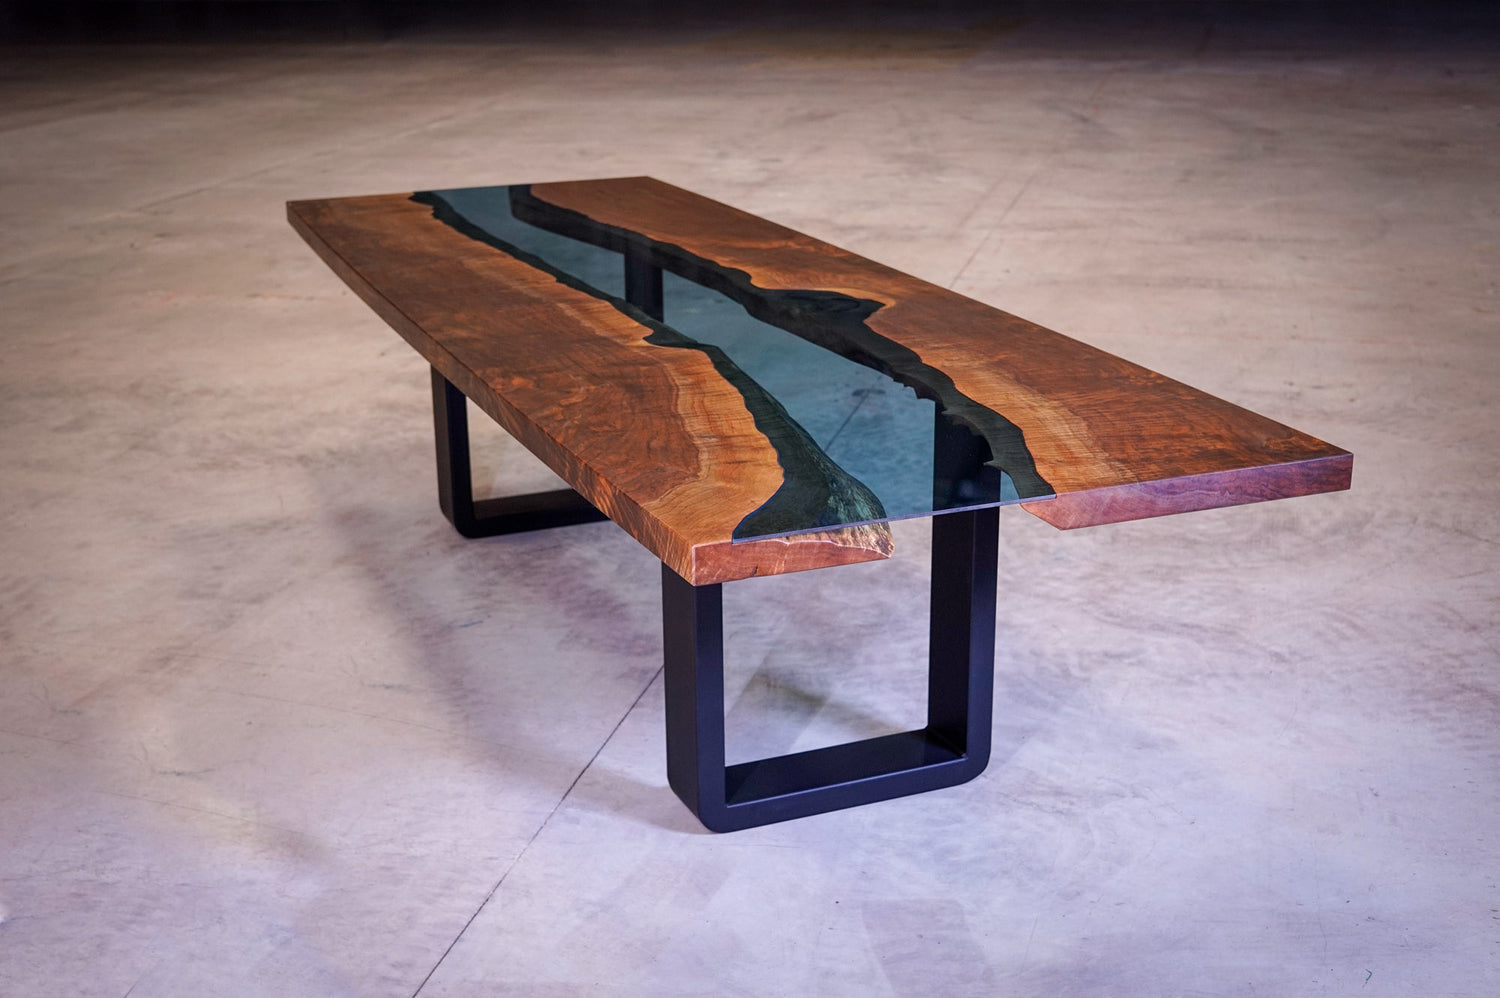 A distant shot of a large custom glass river table, orangey brown walnut slabs on either side, with a custom piece of blue tempered glass inlaid down the middle.